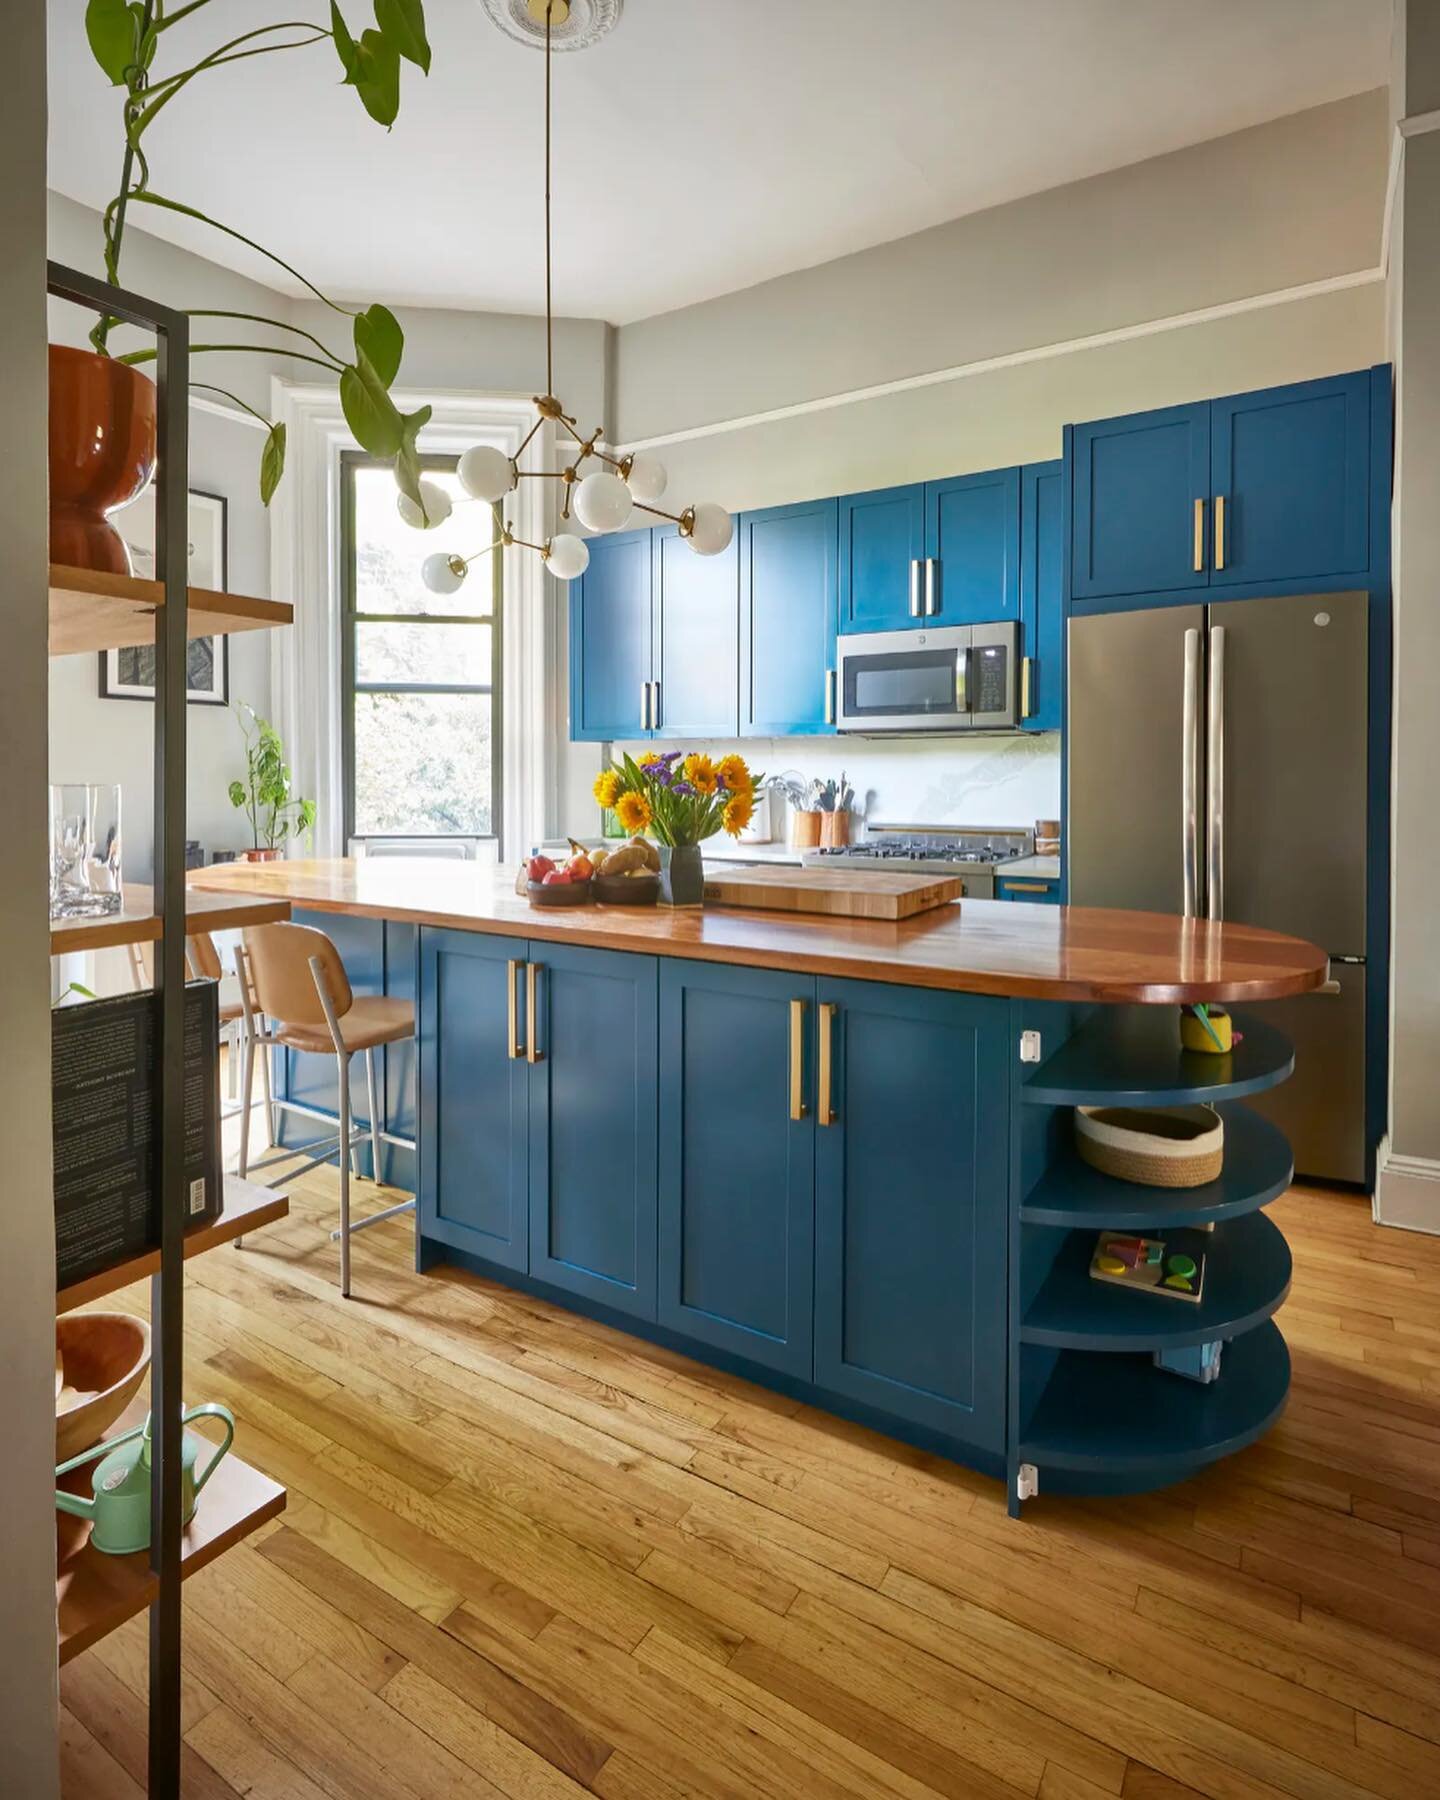 Featured on @apartmenttherapy 💙 Gorgeous Park slope residence gets a Teoria kitchen &amp; millwork makeover ✨ 1st post out of 3 ✨we are feeling so lucky to have had the pleasure of working with such amazing clients on this one @mcarlinsilver @cbeach